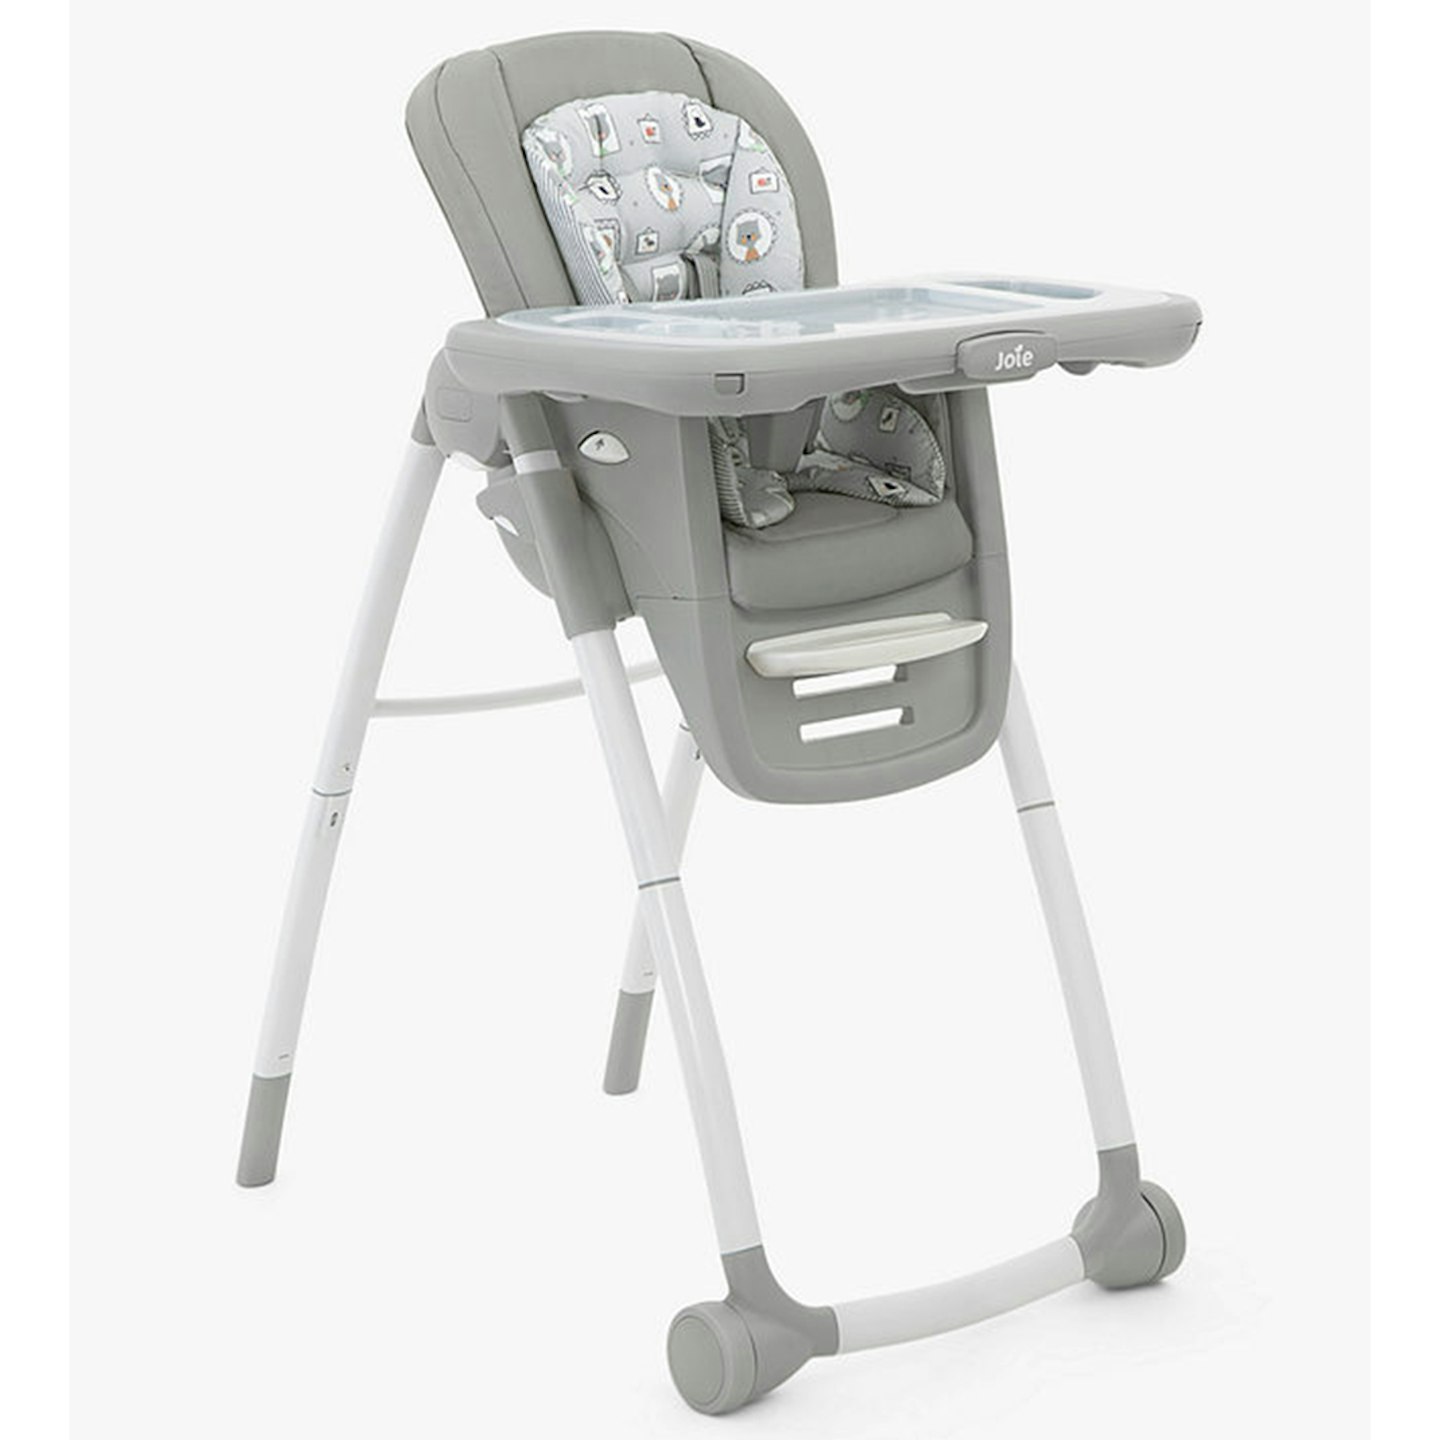 Joie Baby Multiply 6 in 1 Highchair